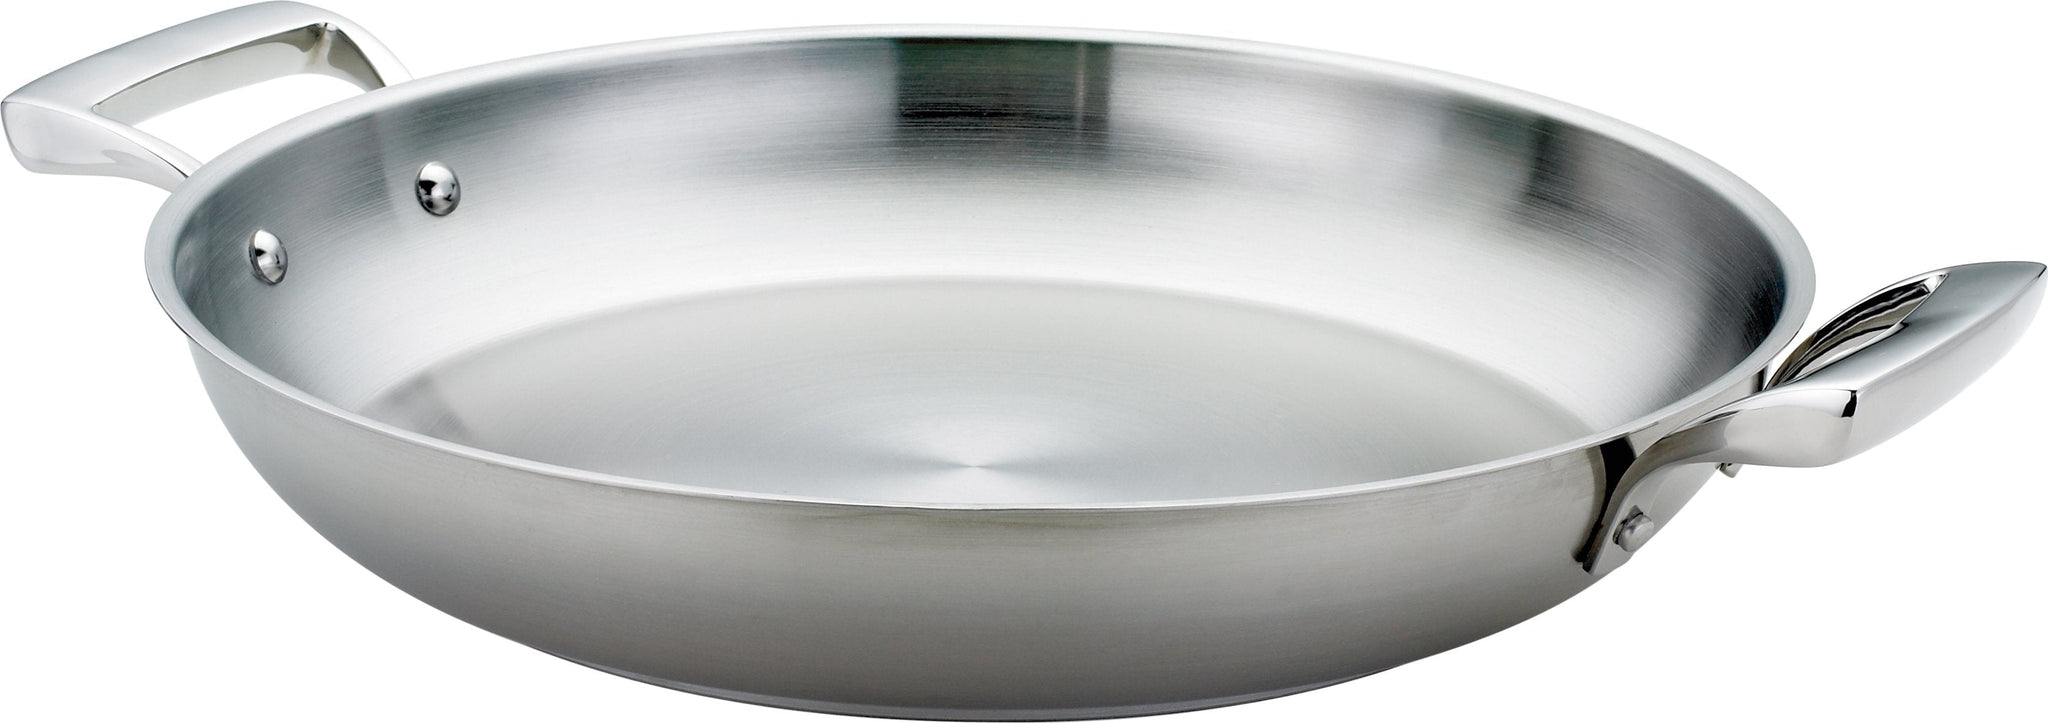 Thermalloy - 11" Tri-Ply Stainless Steel Paella Pan (Lid Not Included) - 5724172